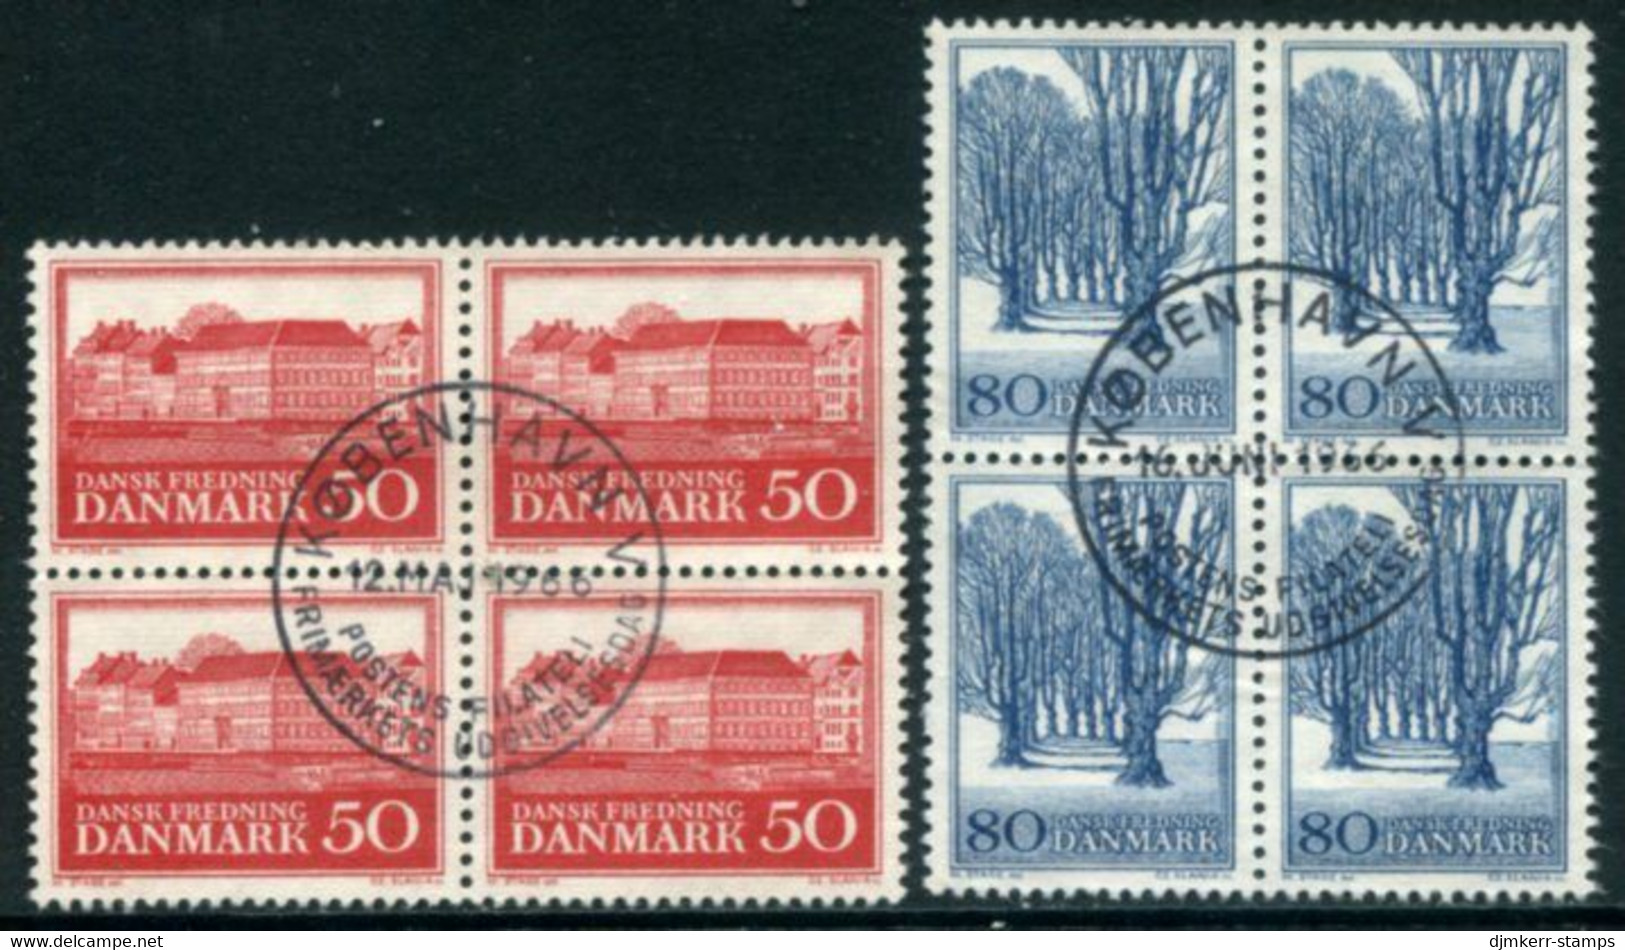 DENMARK 1966 Nature And Monument Protection Blocks Of 4 Used   Michel 442-43x - Gebruikt